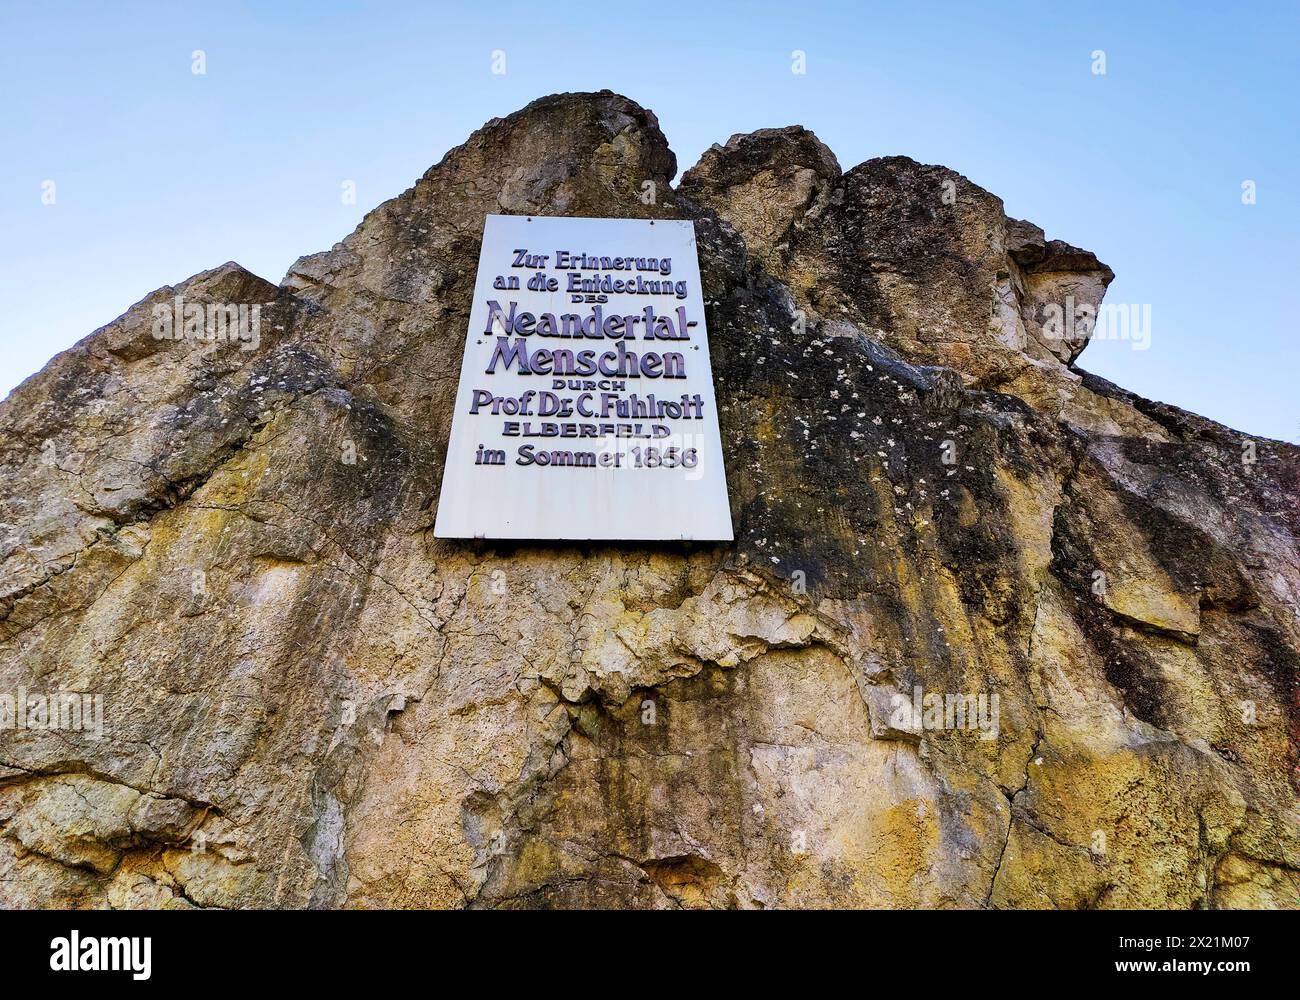 Commemorative plaque on the Rabenstein commemorating the discovery of the Neanderthal man by Johann Carl Fuhlrott, Neandertal, Germany, North Rhine-We Stock Photo